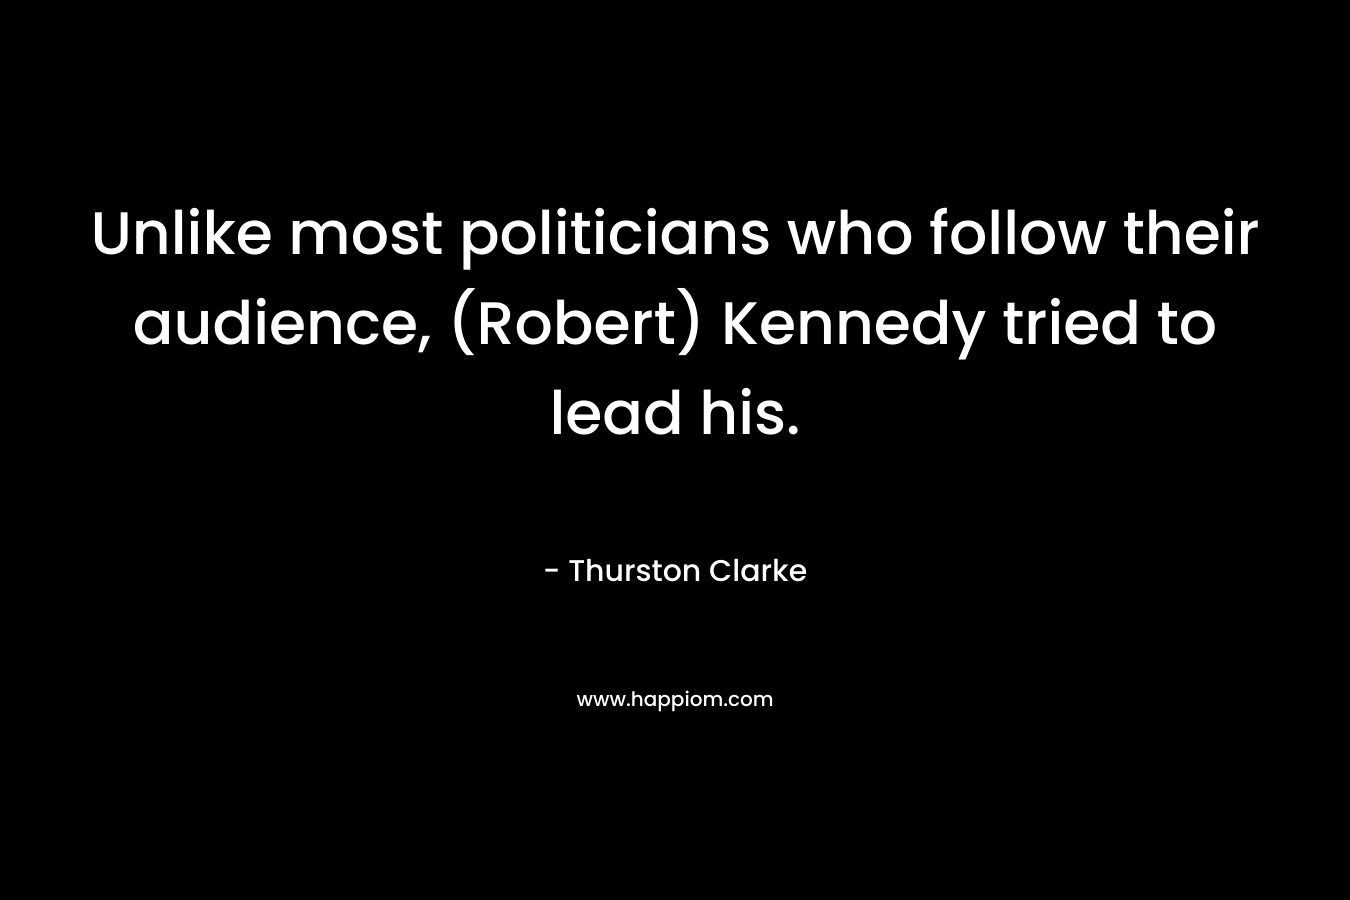 Unlike most politicians who follow their audience, (Robert) Kennedy tried to lead his. – Thurston Clarke